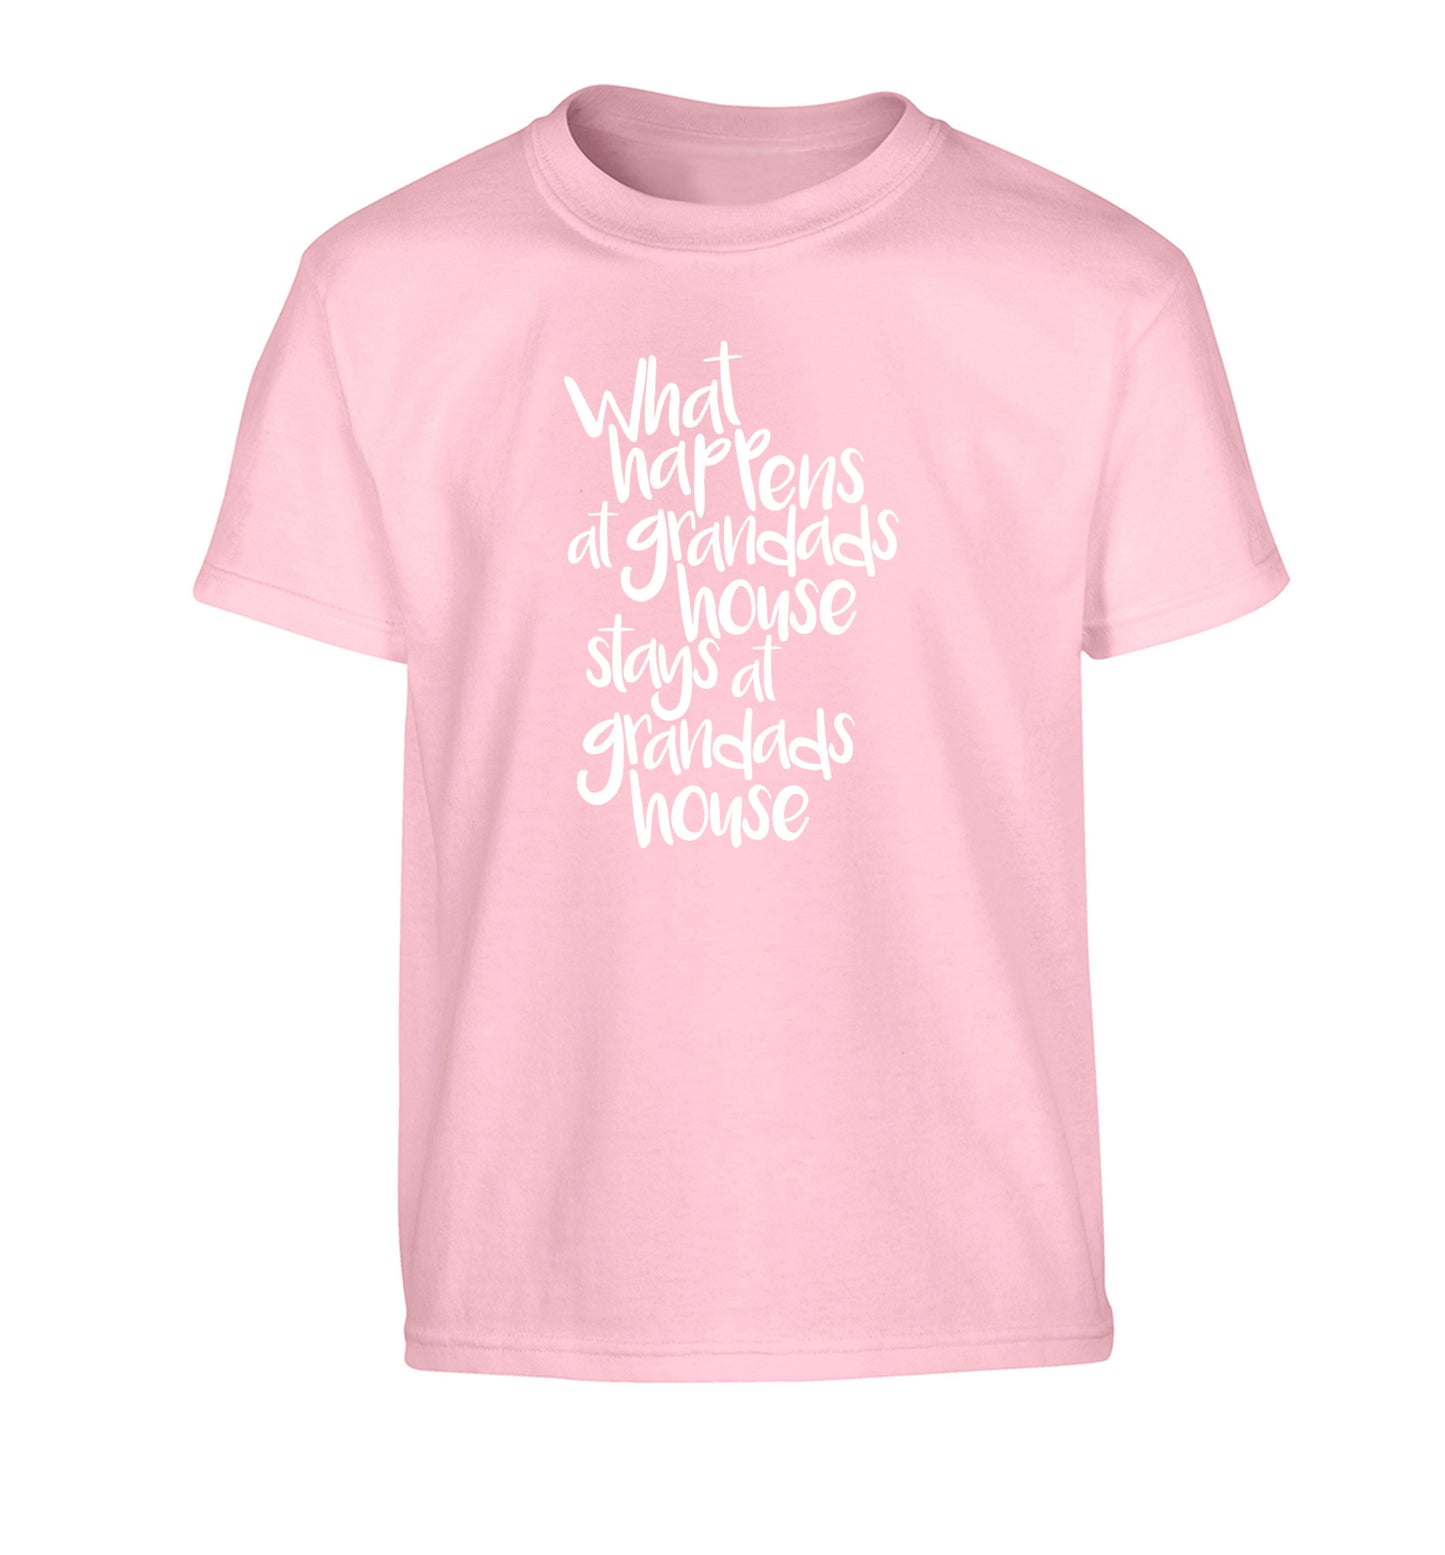 What happens at grandads house stays at grandads house Children's light pink Tshirt 12-14 Years